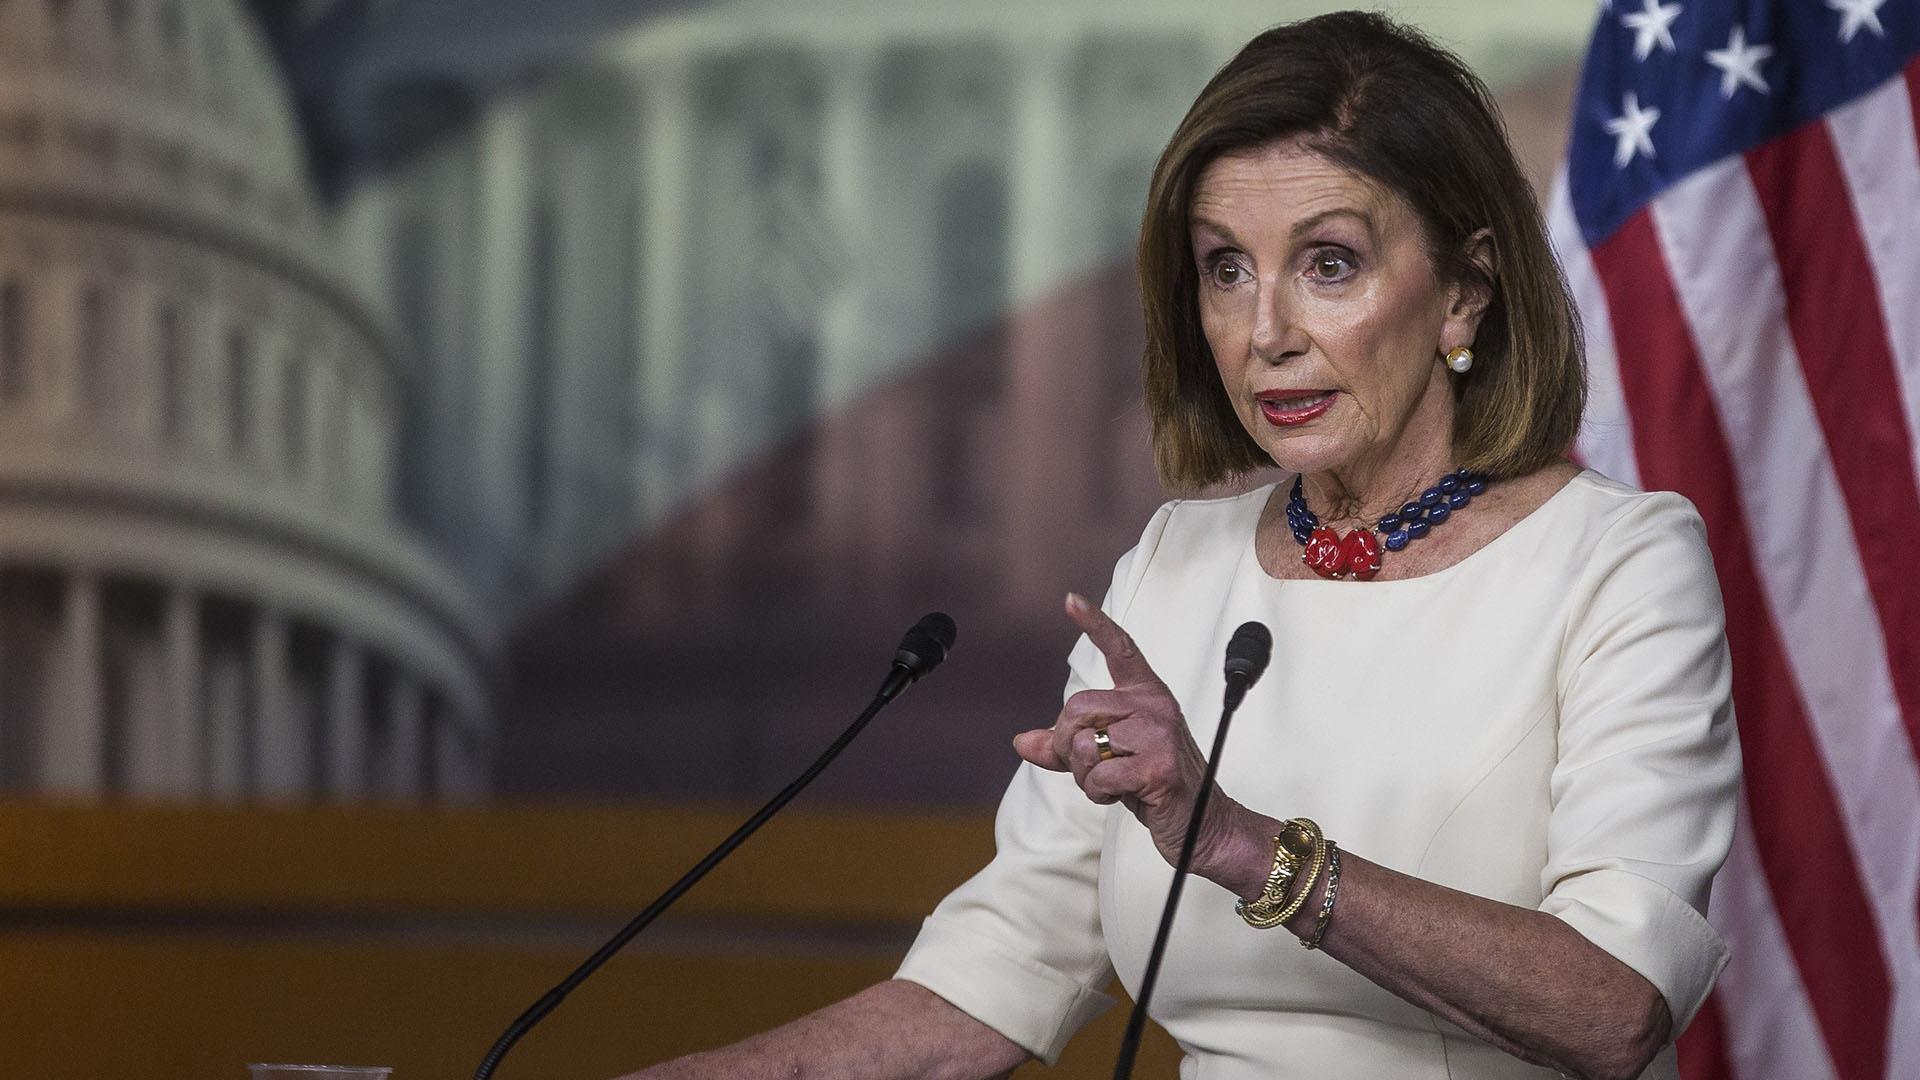 Caught On Hot Mic, Pelosi Says ‘Americans